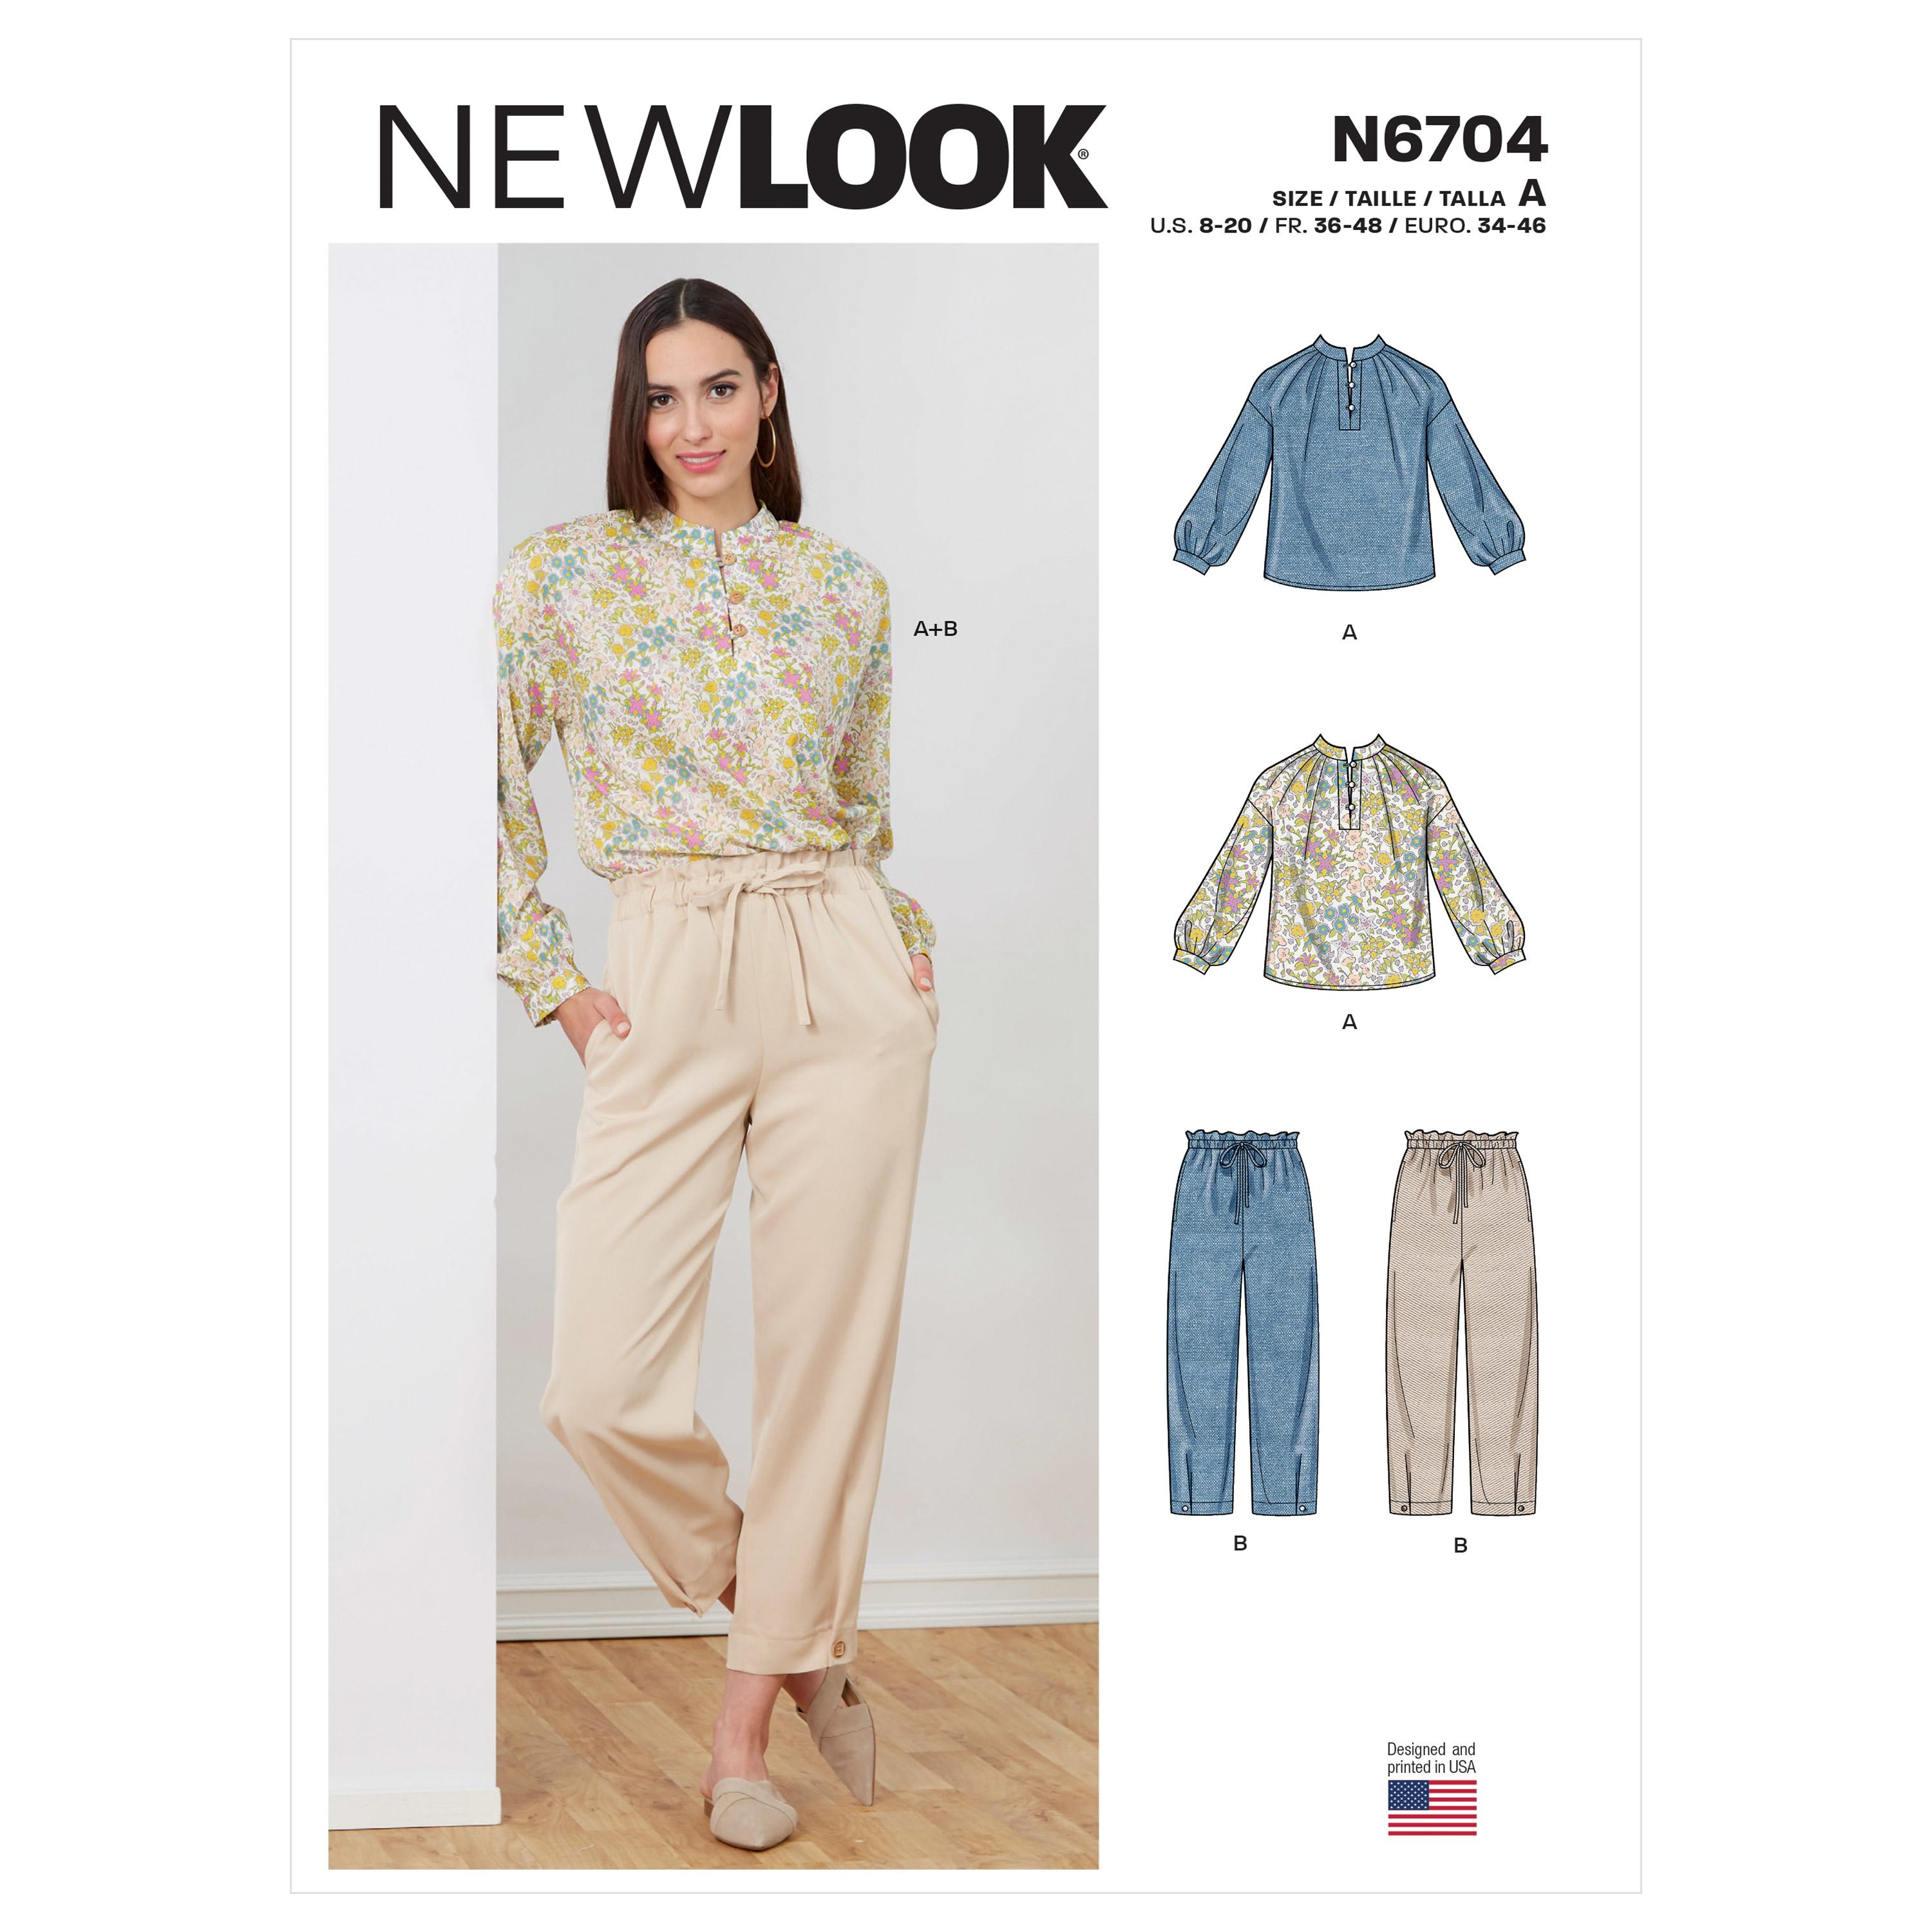 New Look Sewing Pattern N6704 Misses' Top and Pull-On Pant